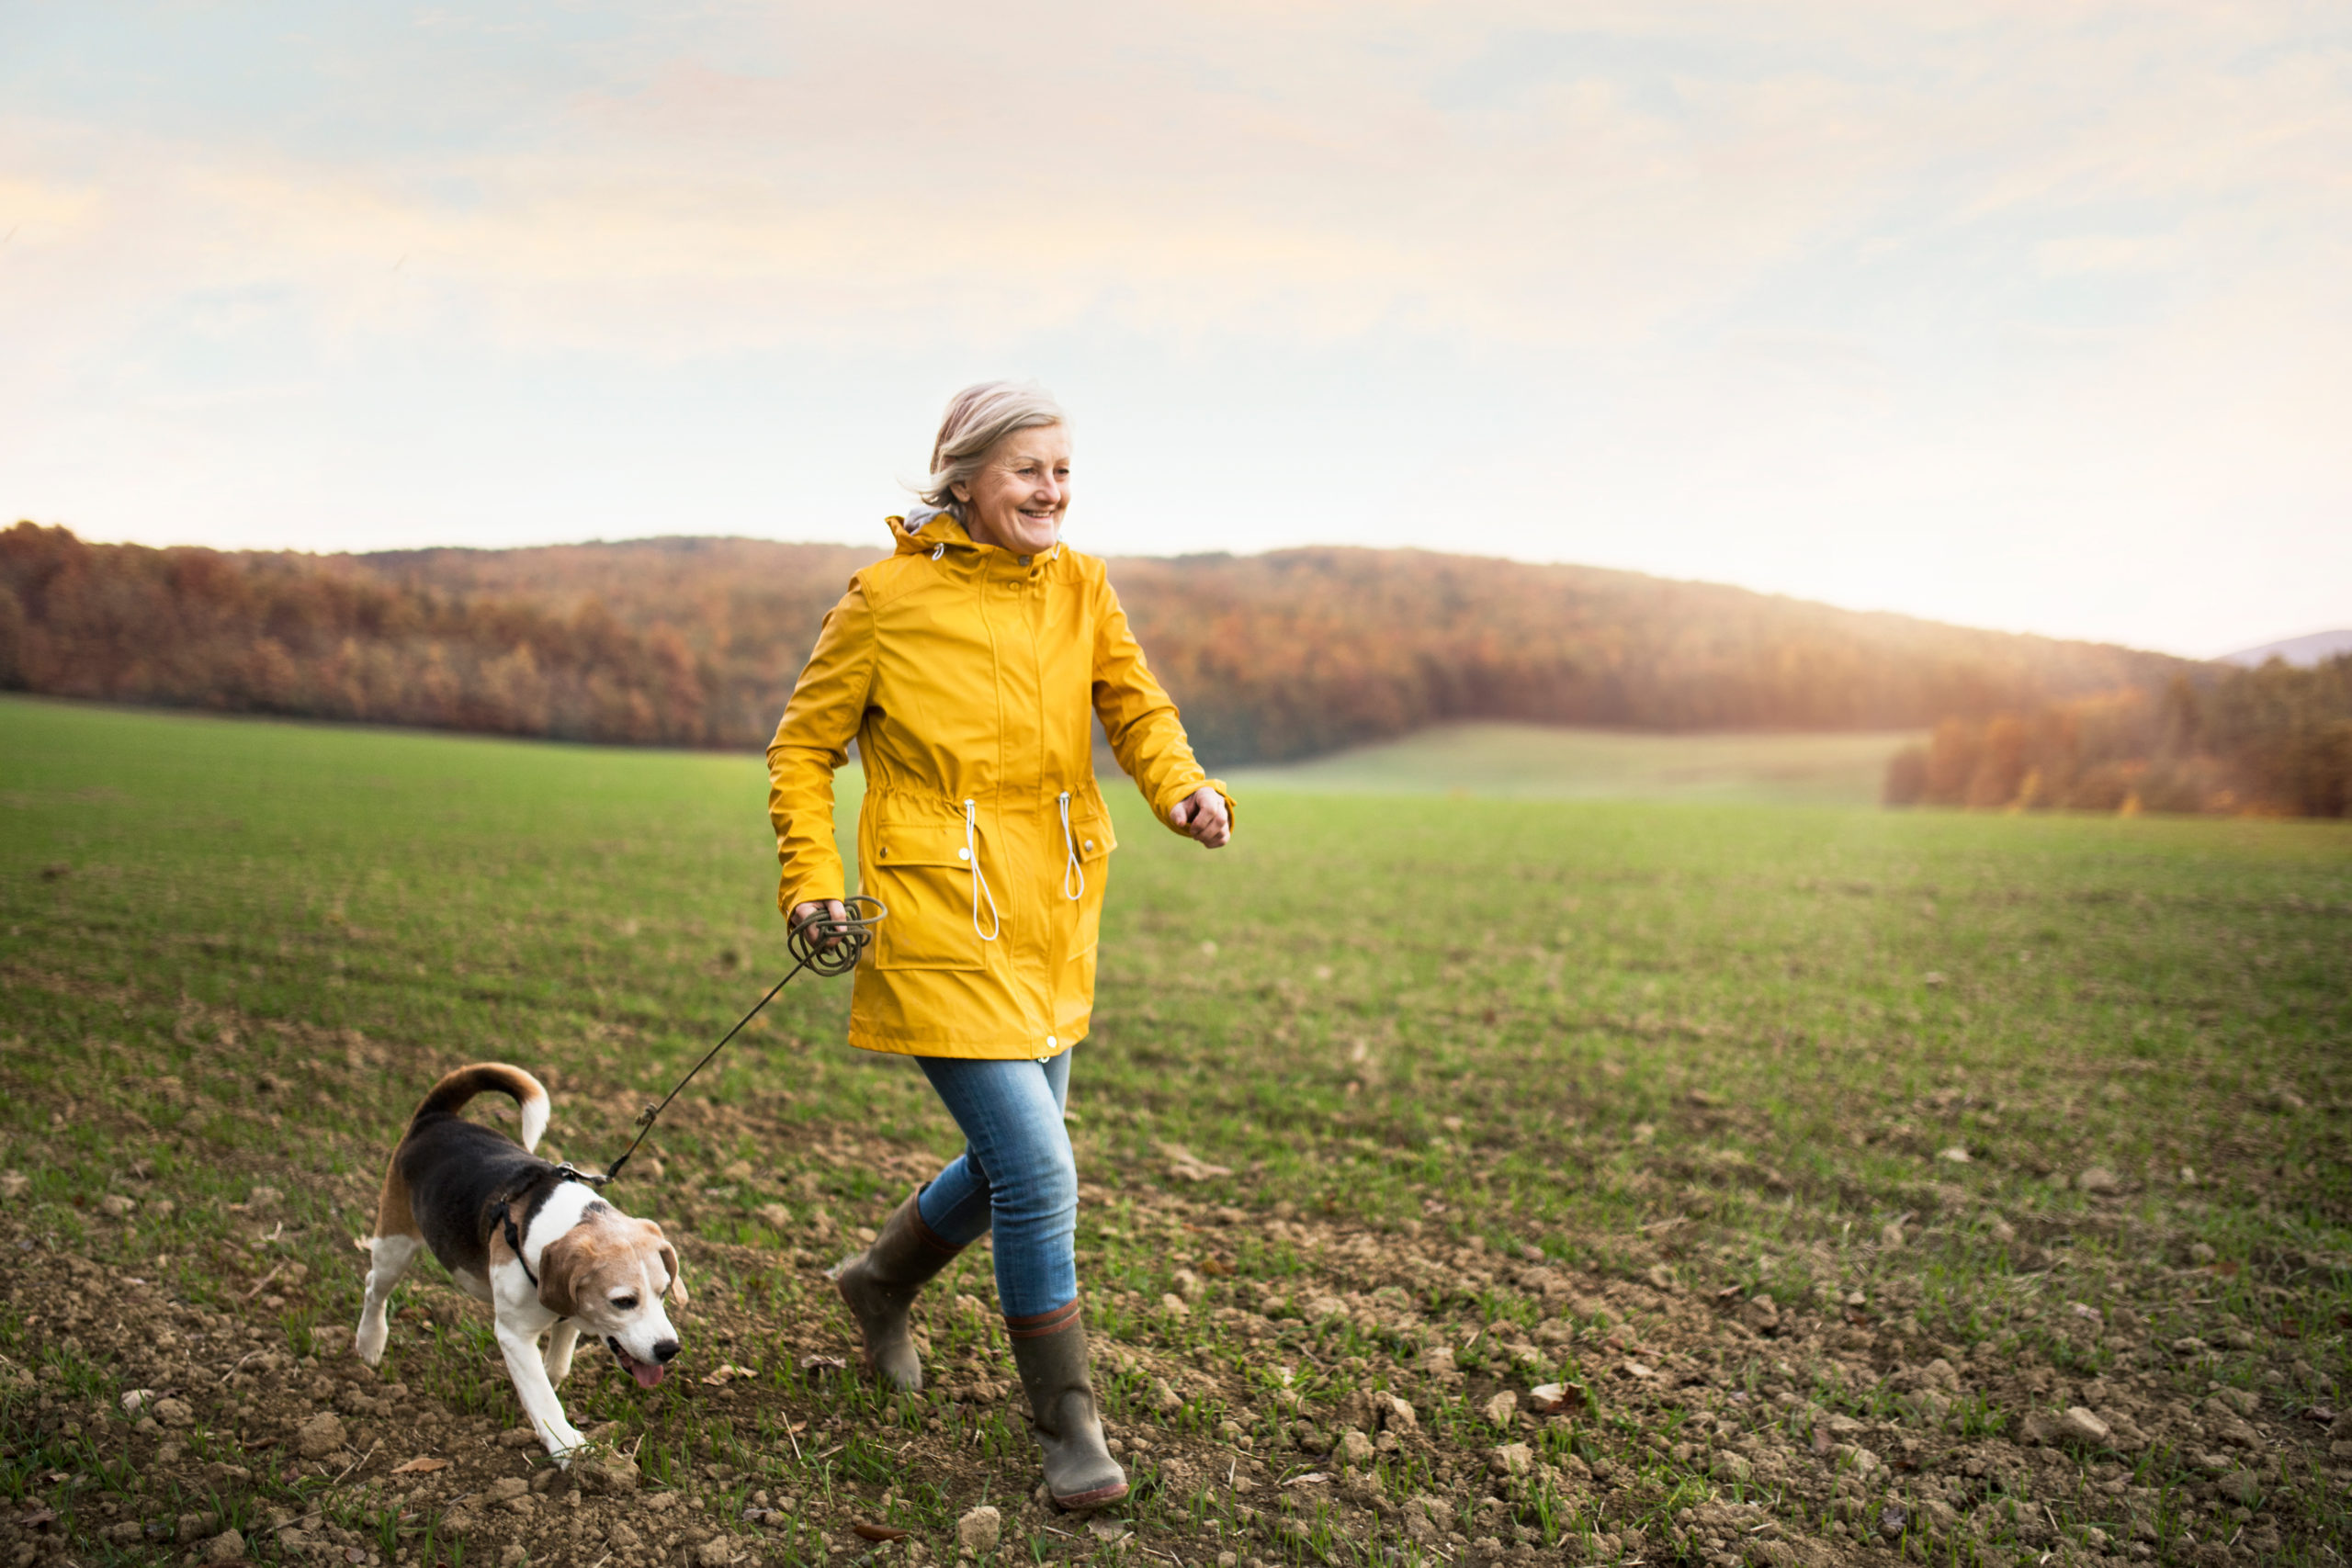  Senior woman in a yellow jacket goes for a jog outdoors with her dog.